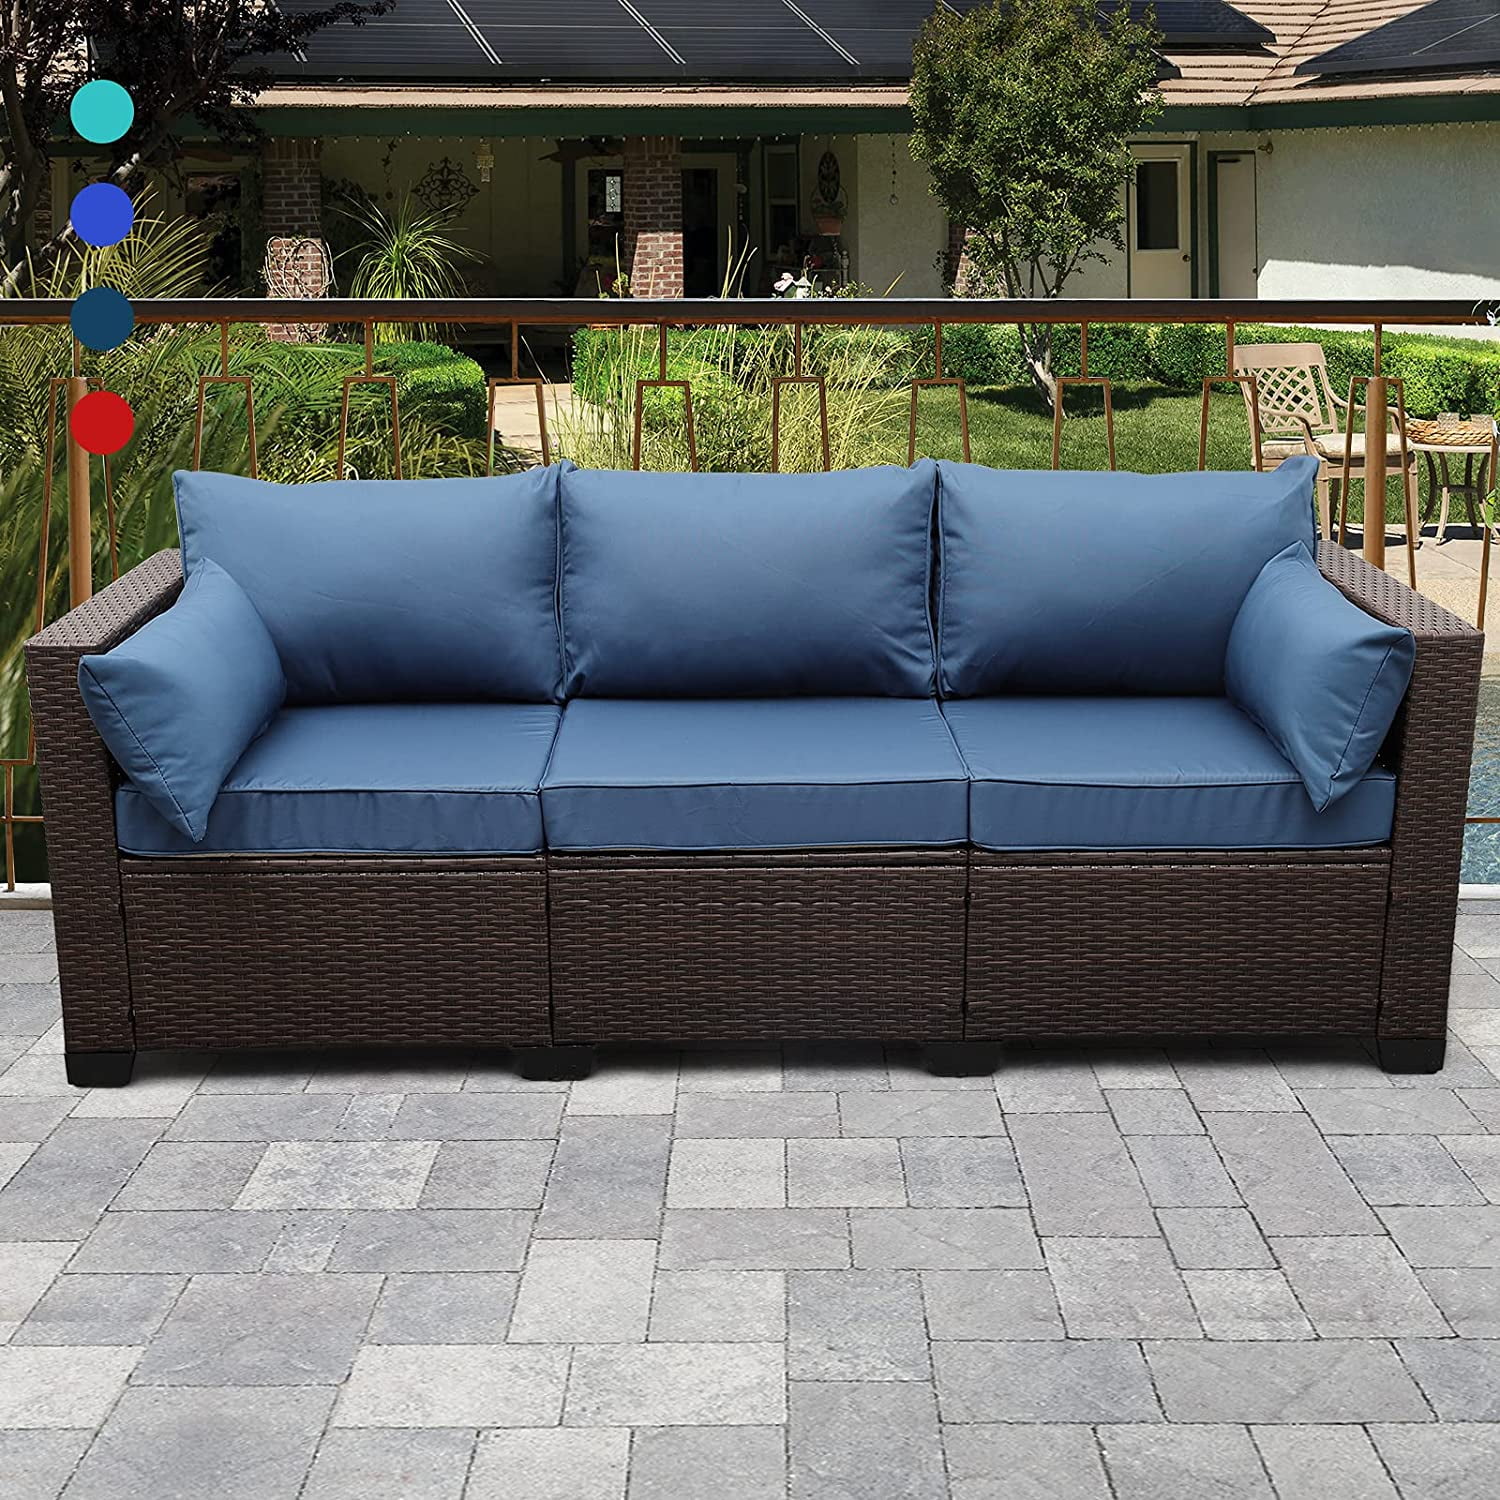 Patio PE Wicker Couch 3-Seat Outdoor Brown Rattan Sofa Seating Furniture with Peacock Blue Cushion 